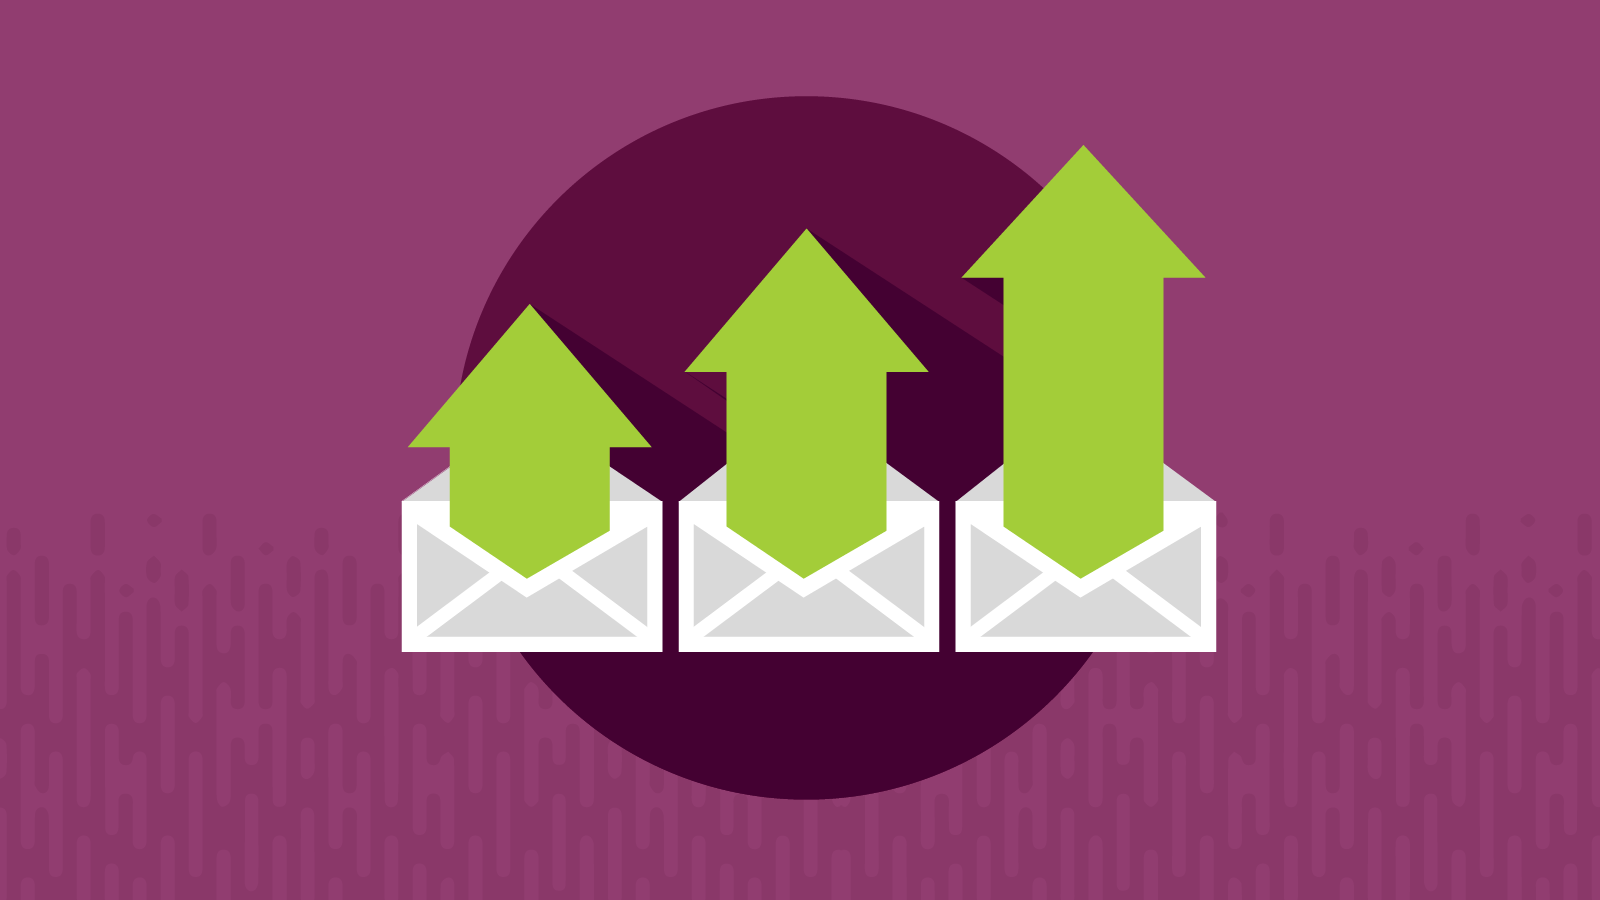 three up arrows from envelopes for increased email open rates